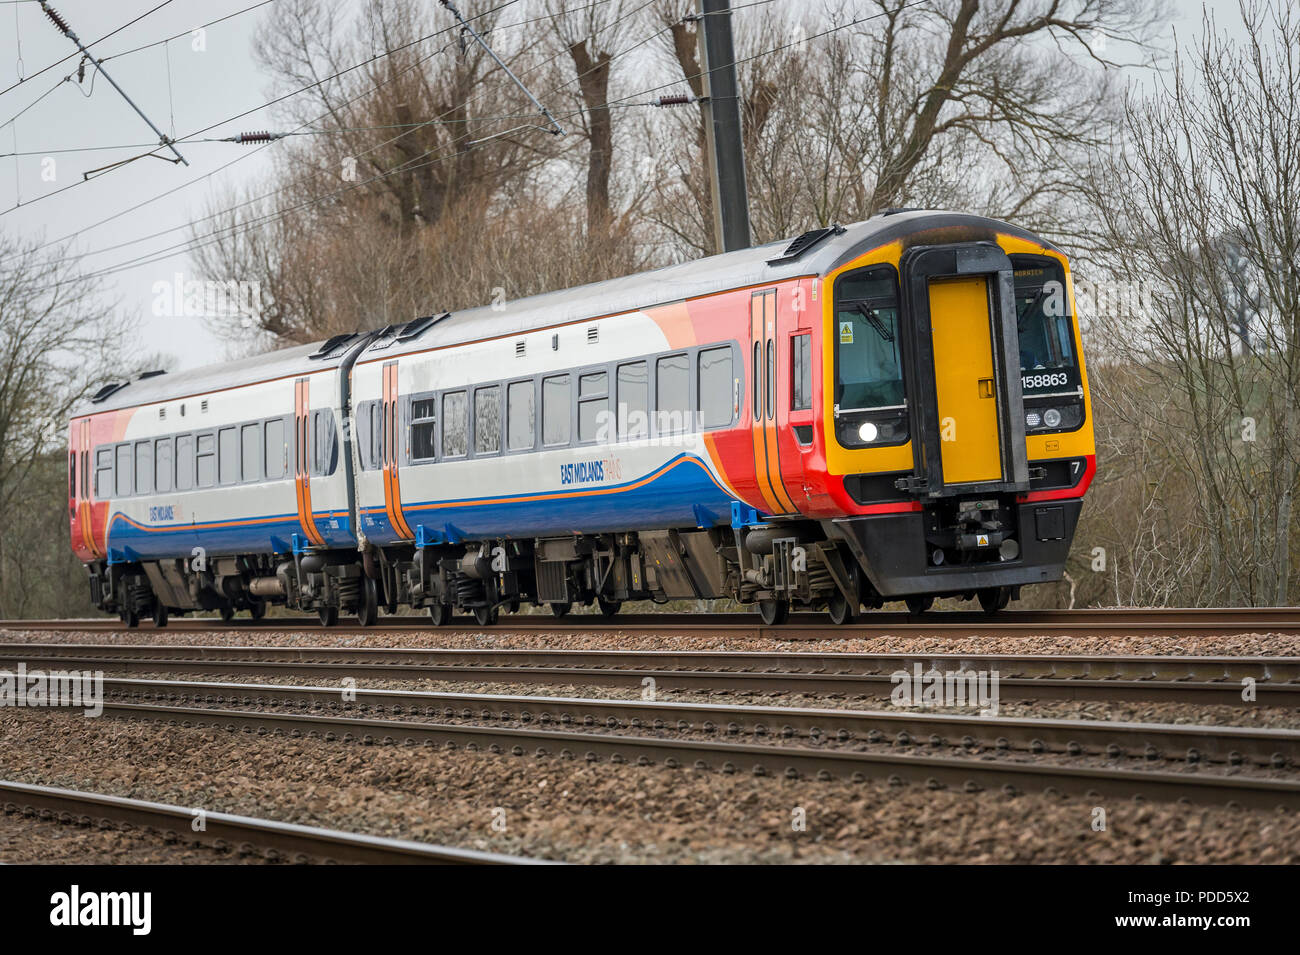 Class 158 train in East Midlands Trains livery travelling through the English countryside. Stock Photo